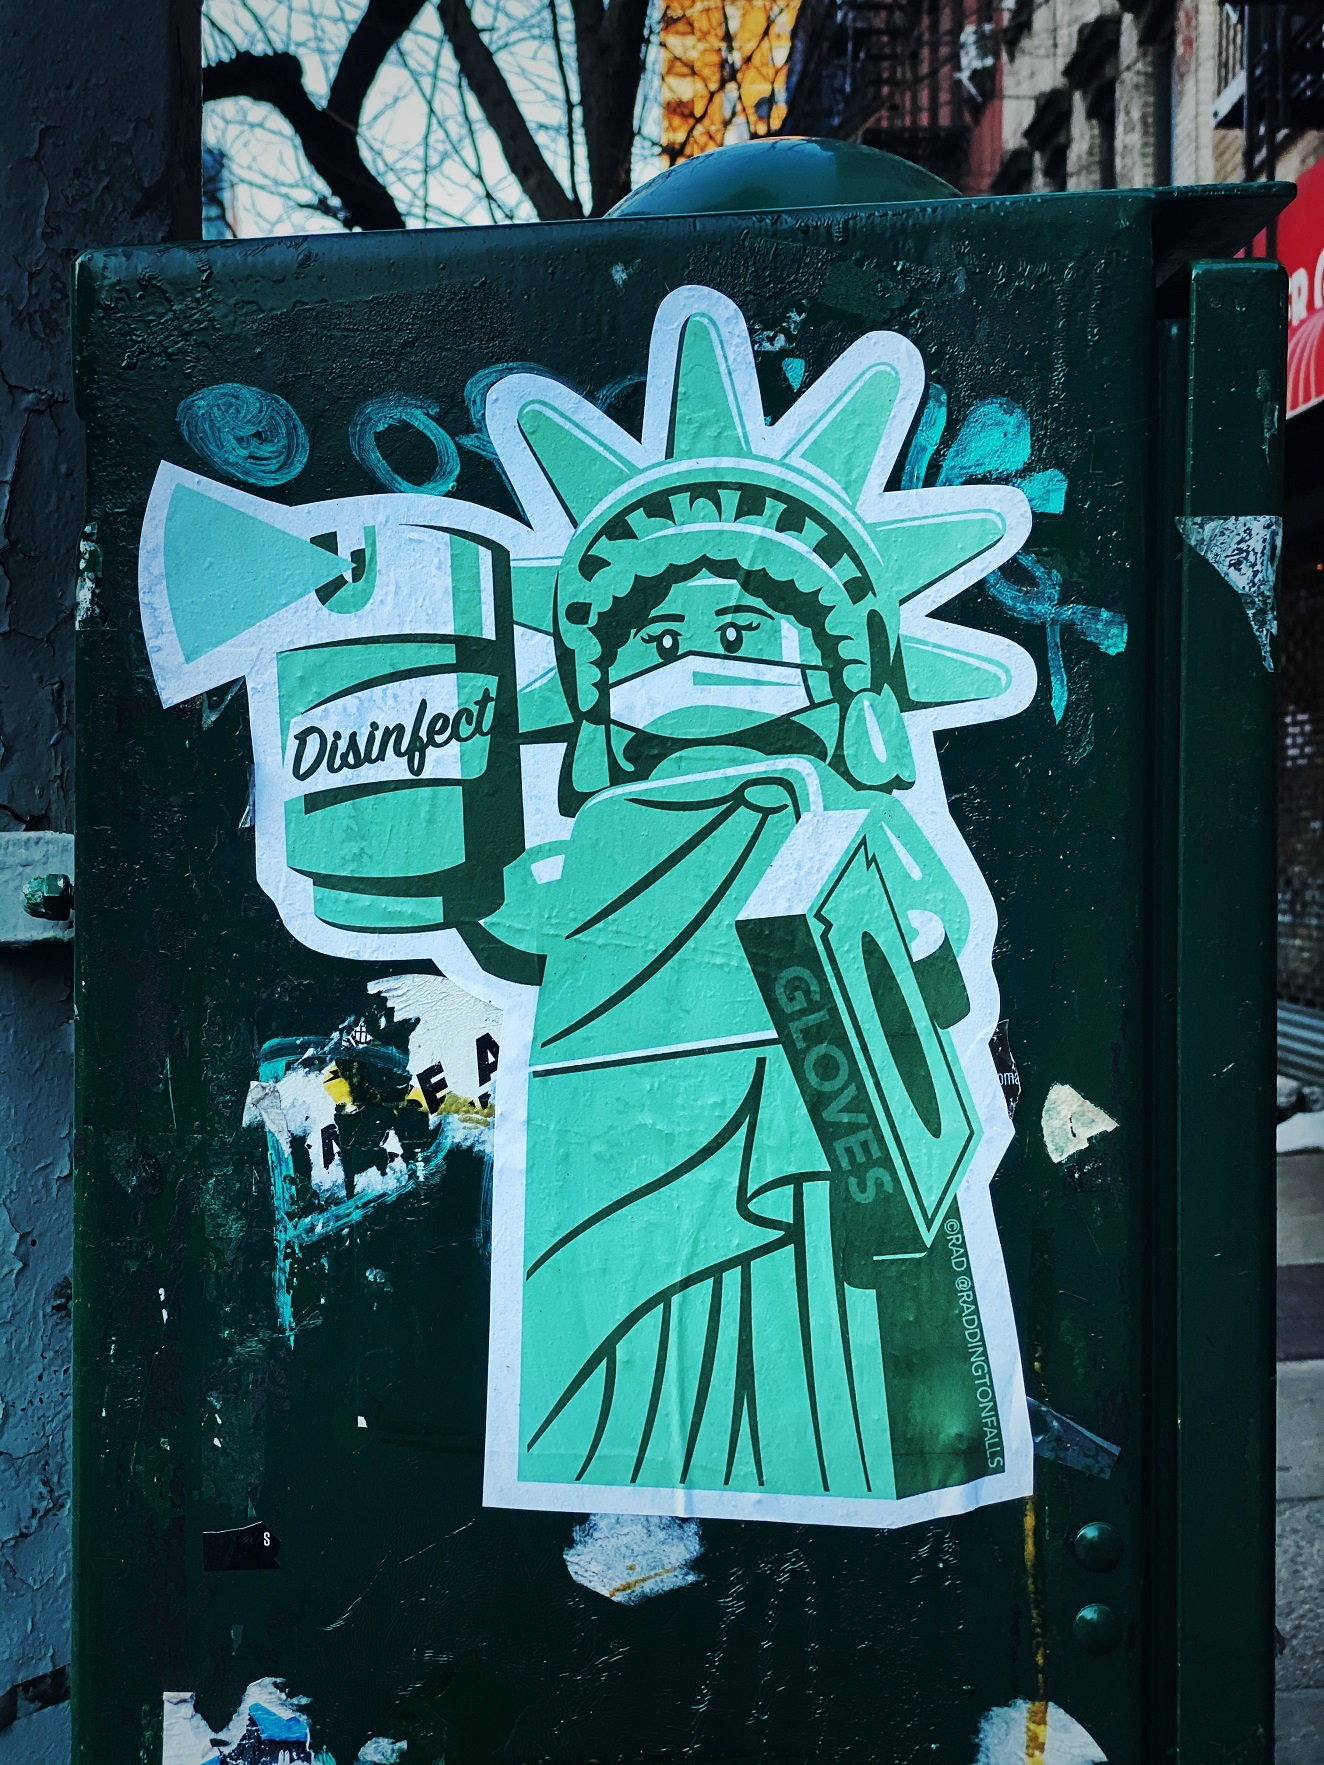 Statue of Liberty cartoon with disinfectant - camp covid